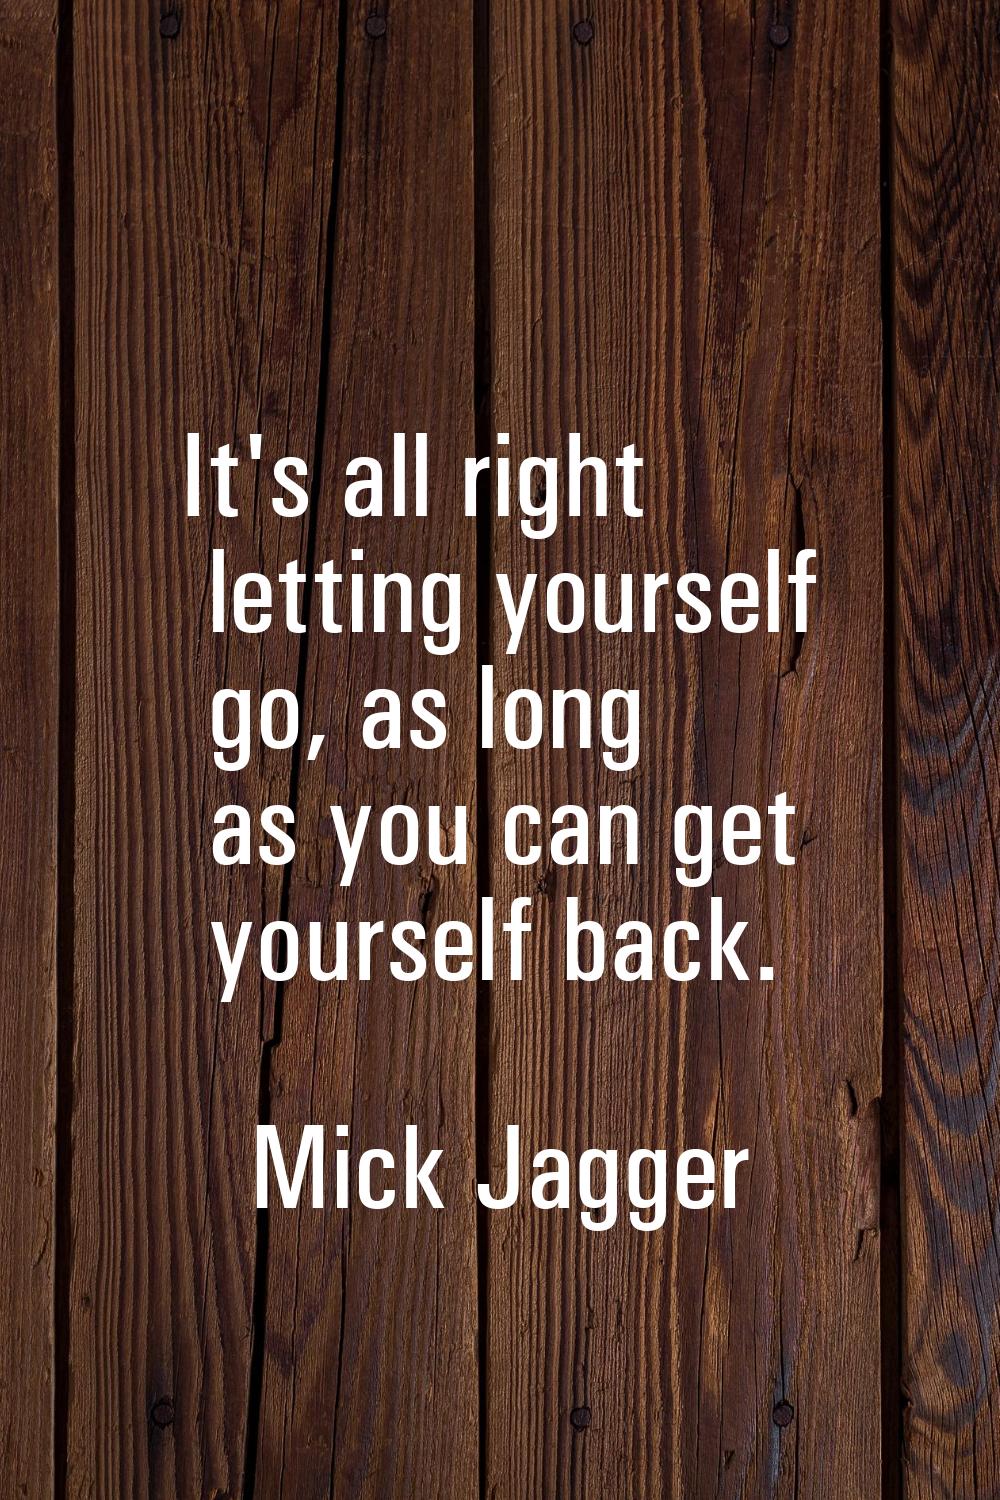 It's all right letting yourself go, as long as you can get yourself back.